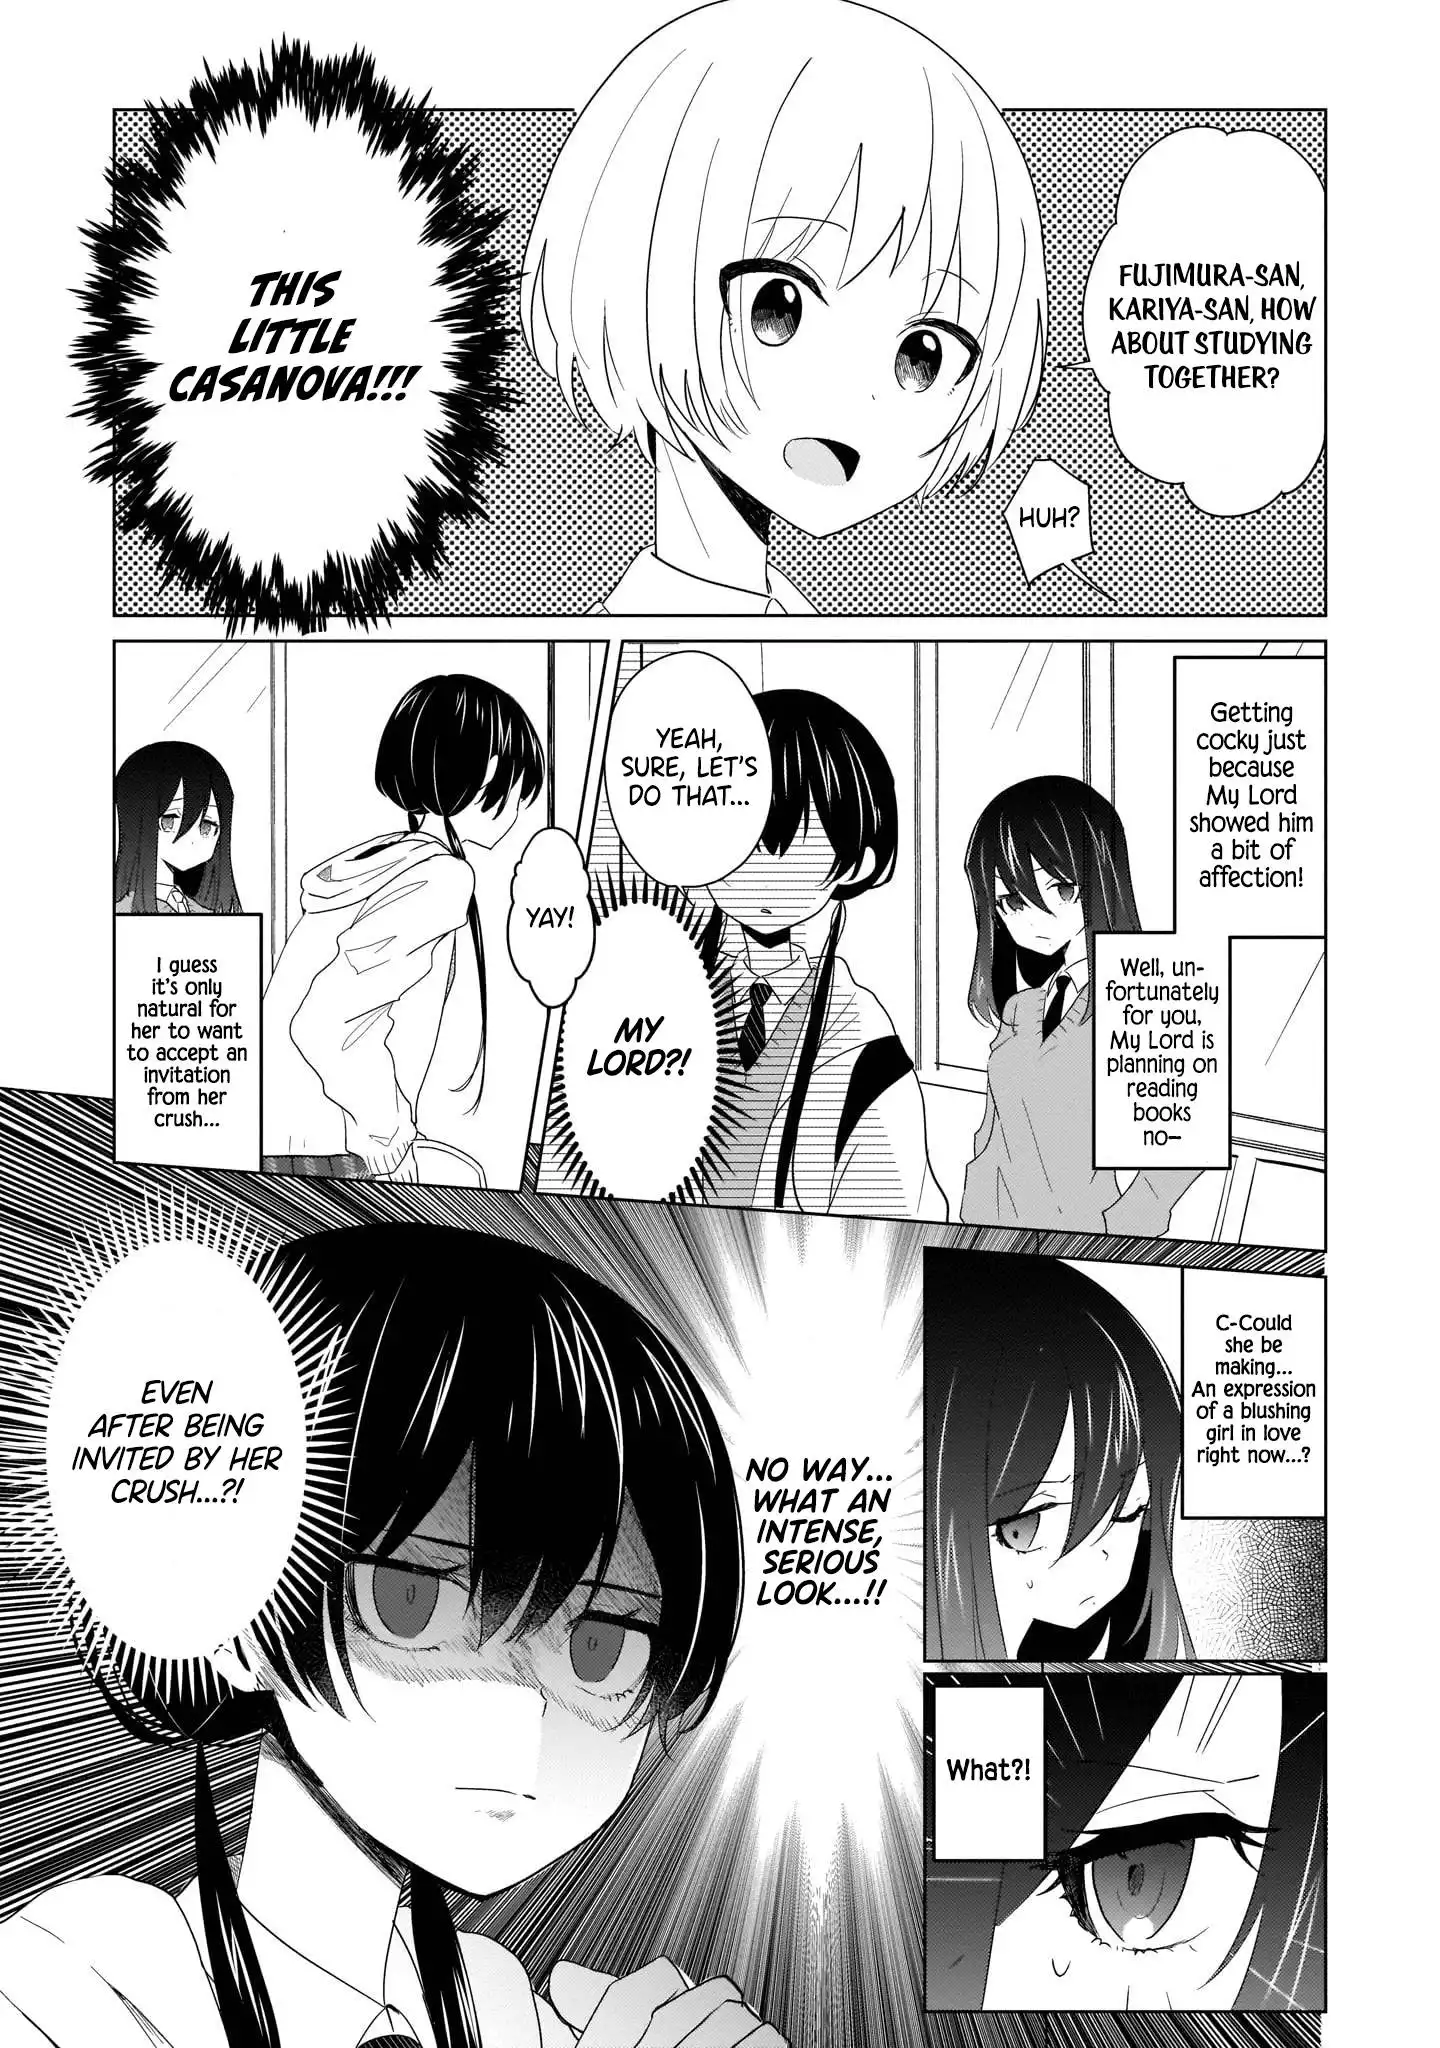 The Demon Lord's Love Life Isn't Going Well Chapter 4